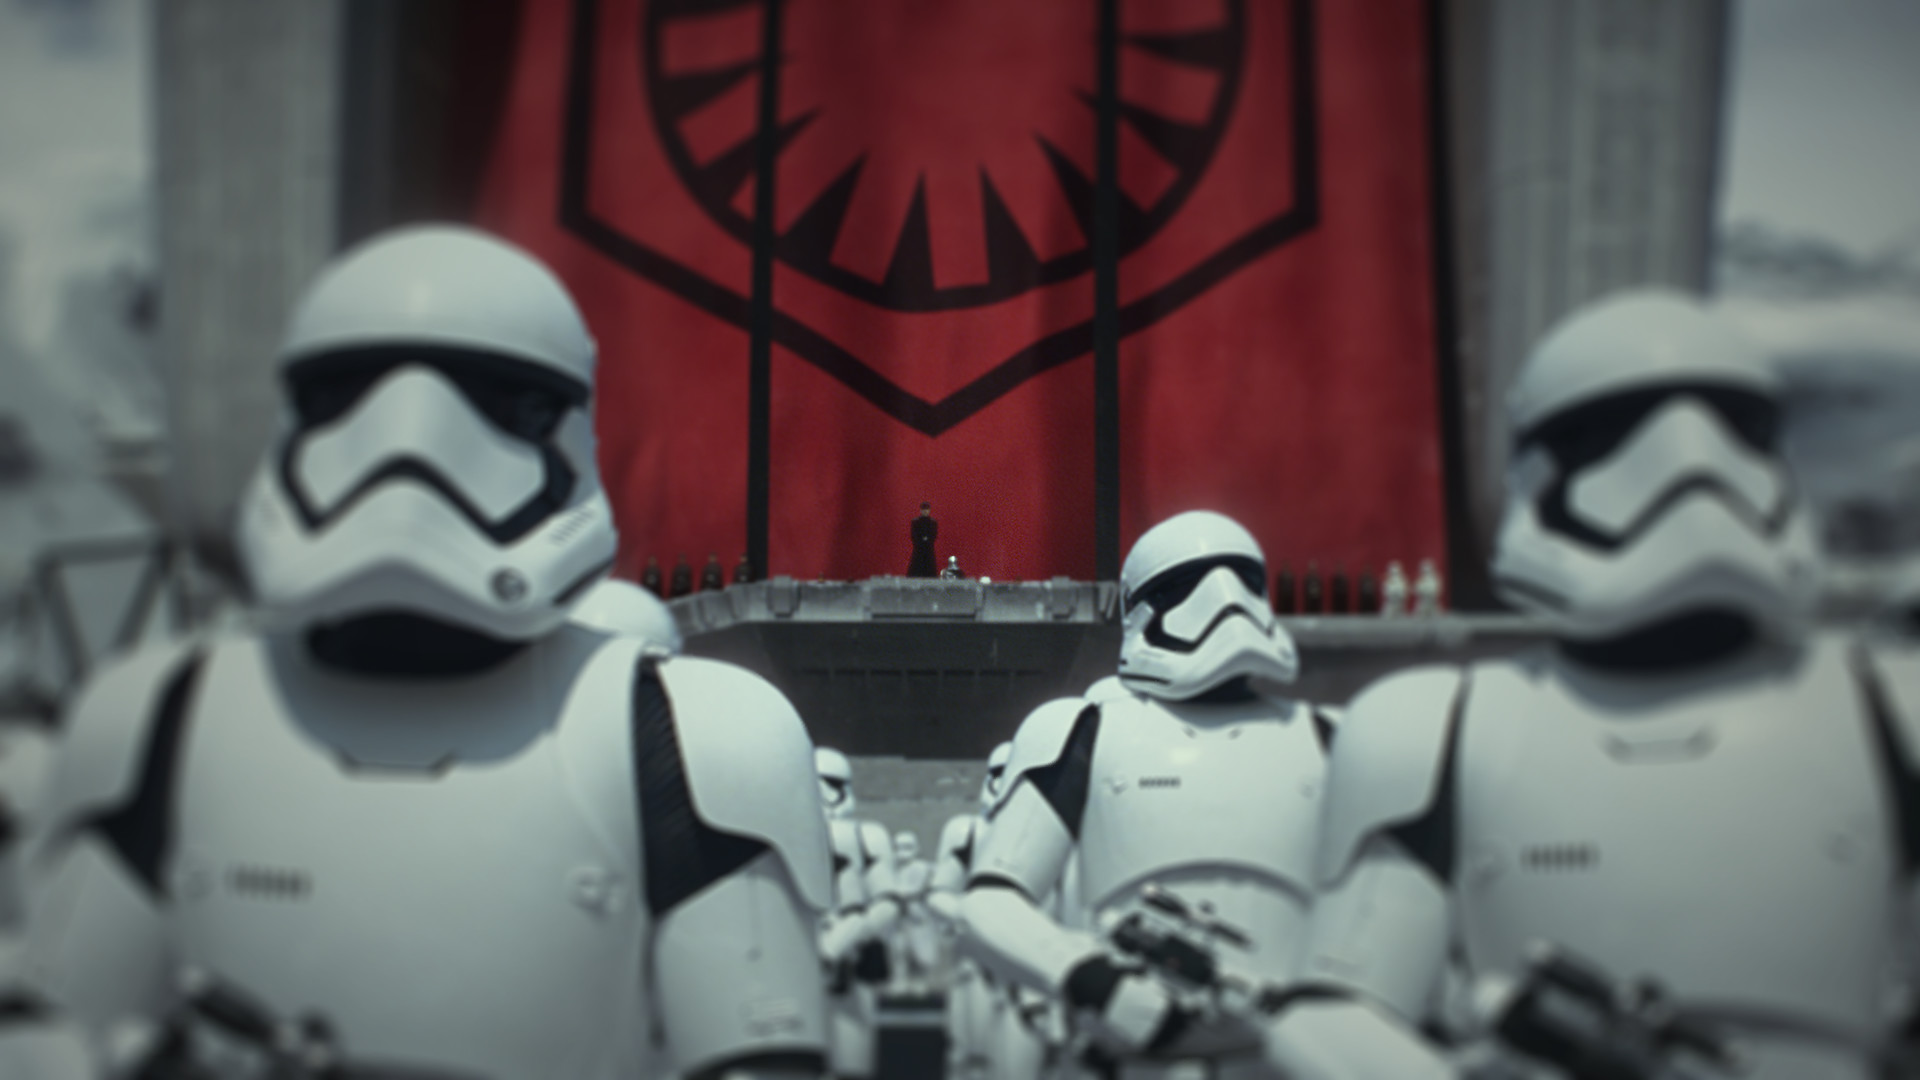 1920x1080 ... Star Wars Ep. 7 First Order wallpaper by PepperRoniLove